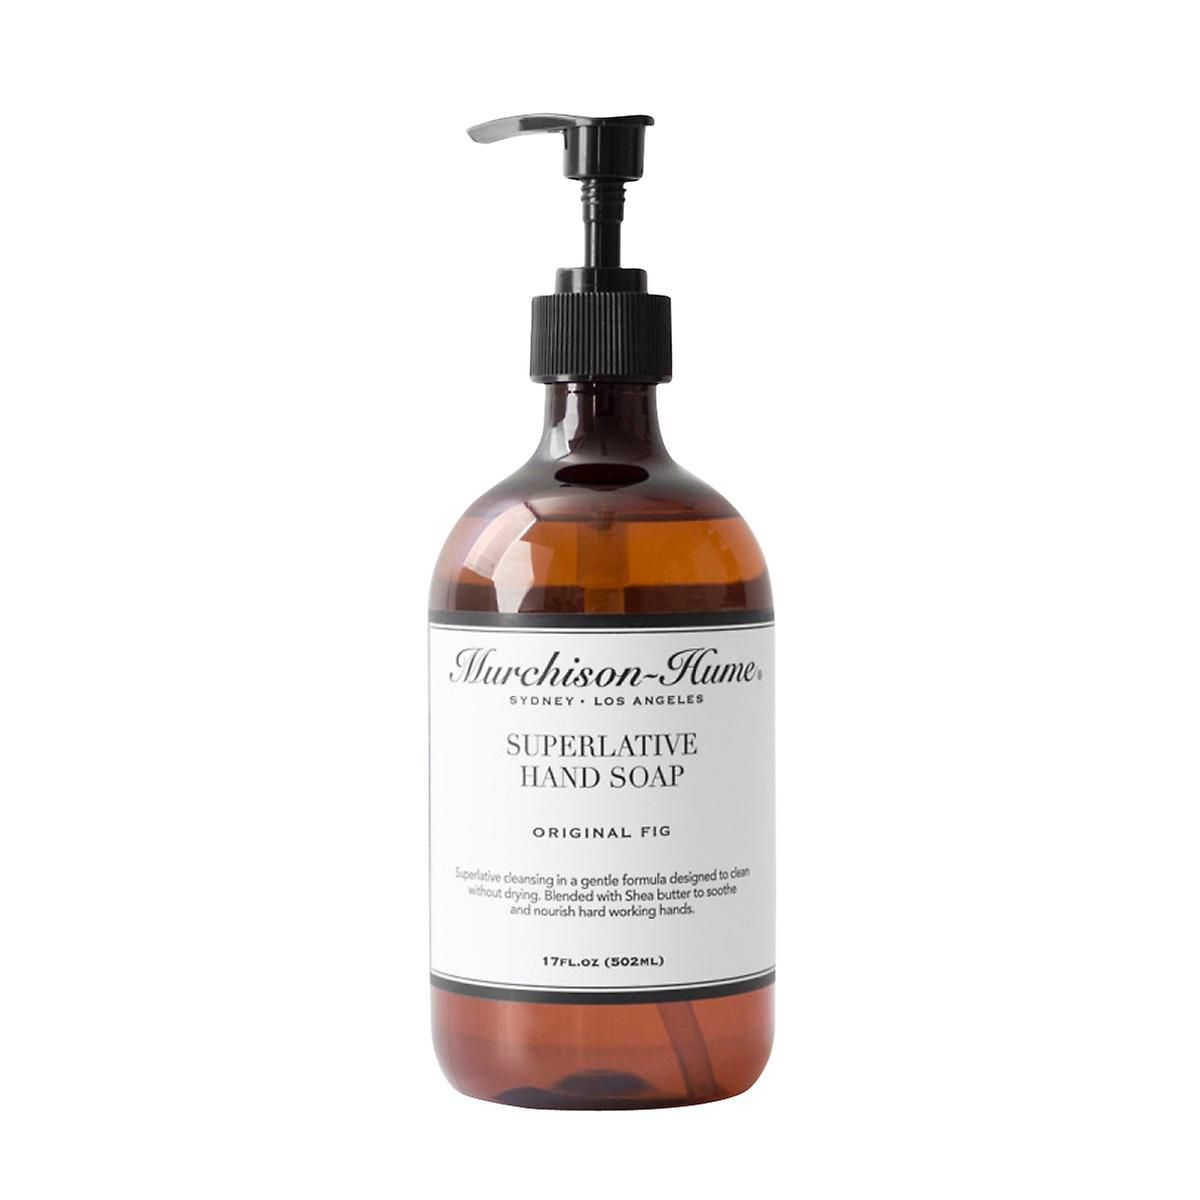 17 oz. Superlative Liquid Hand Soap by Murchison Hume | The Container Store